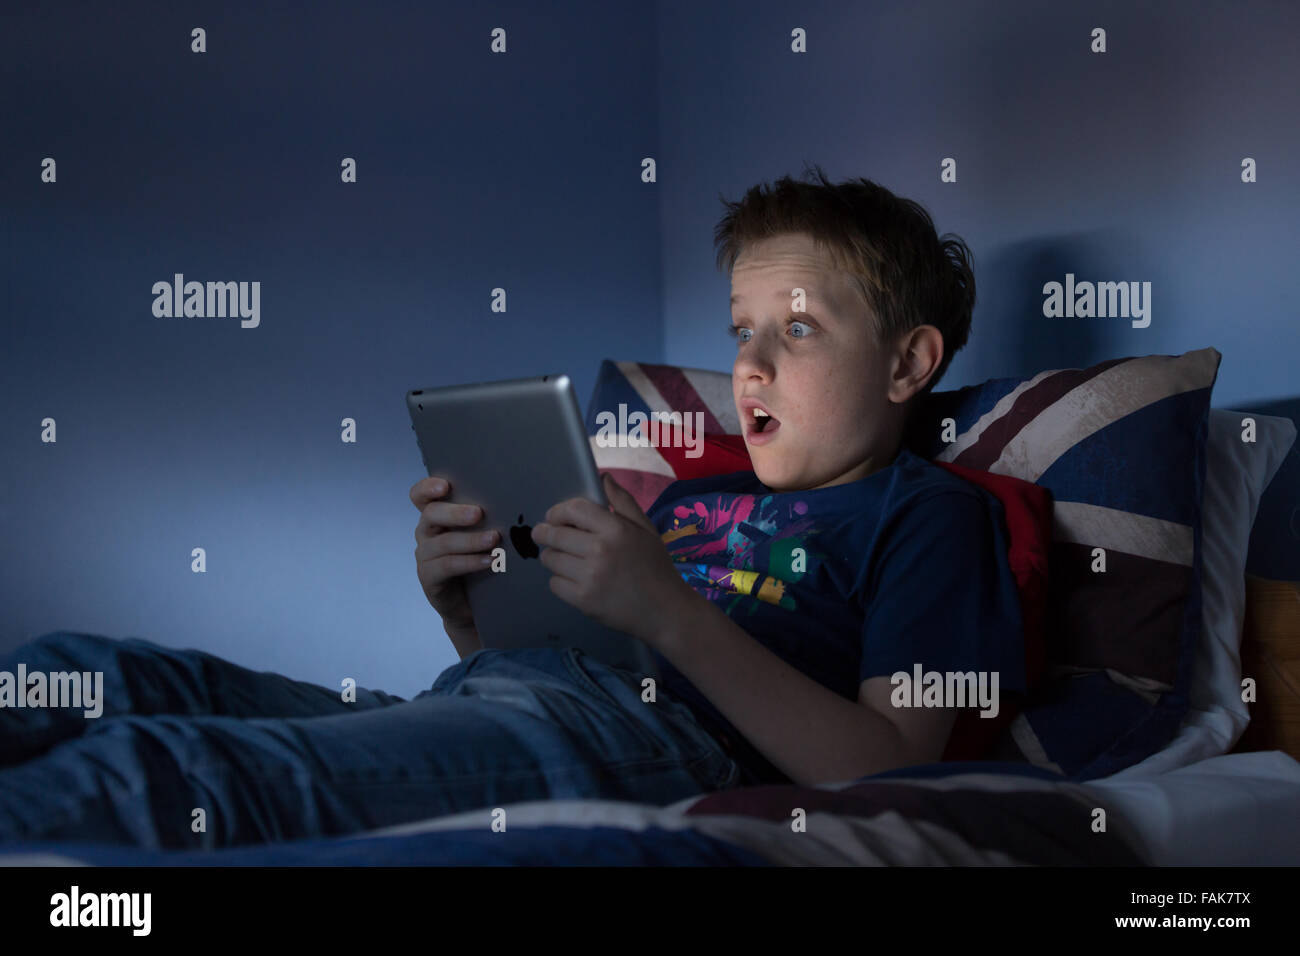 A boy sitting up late in his bedroom looking at the internet shocked at what he is seeing Stock Photo